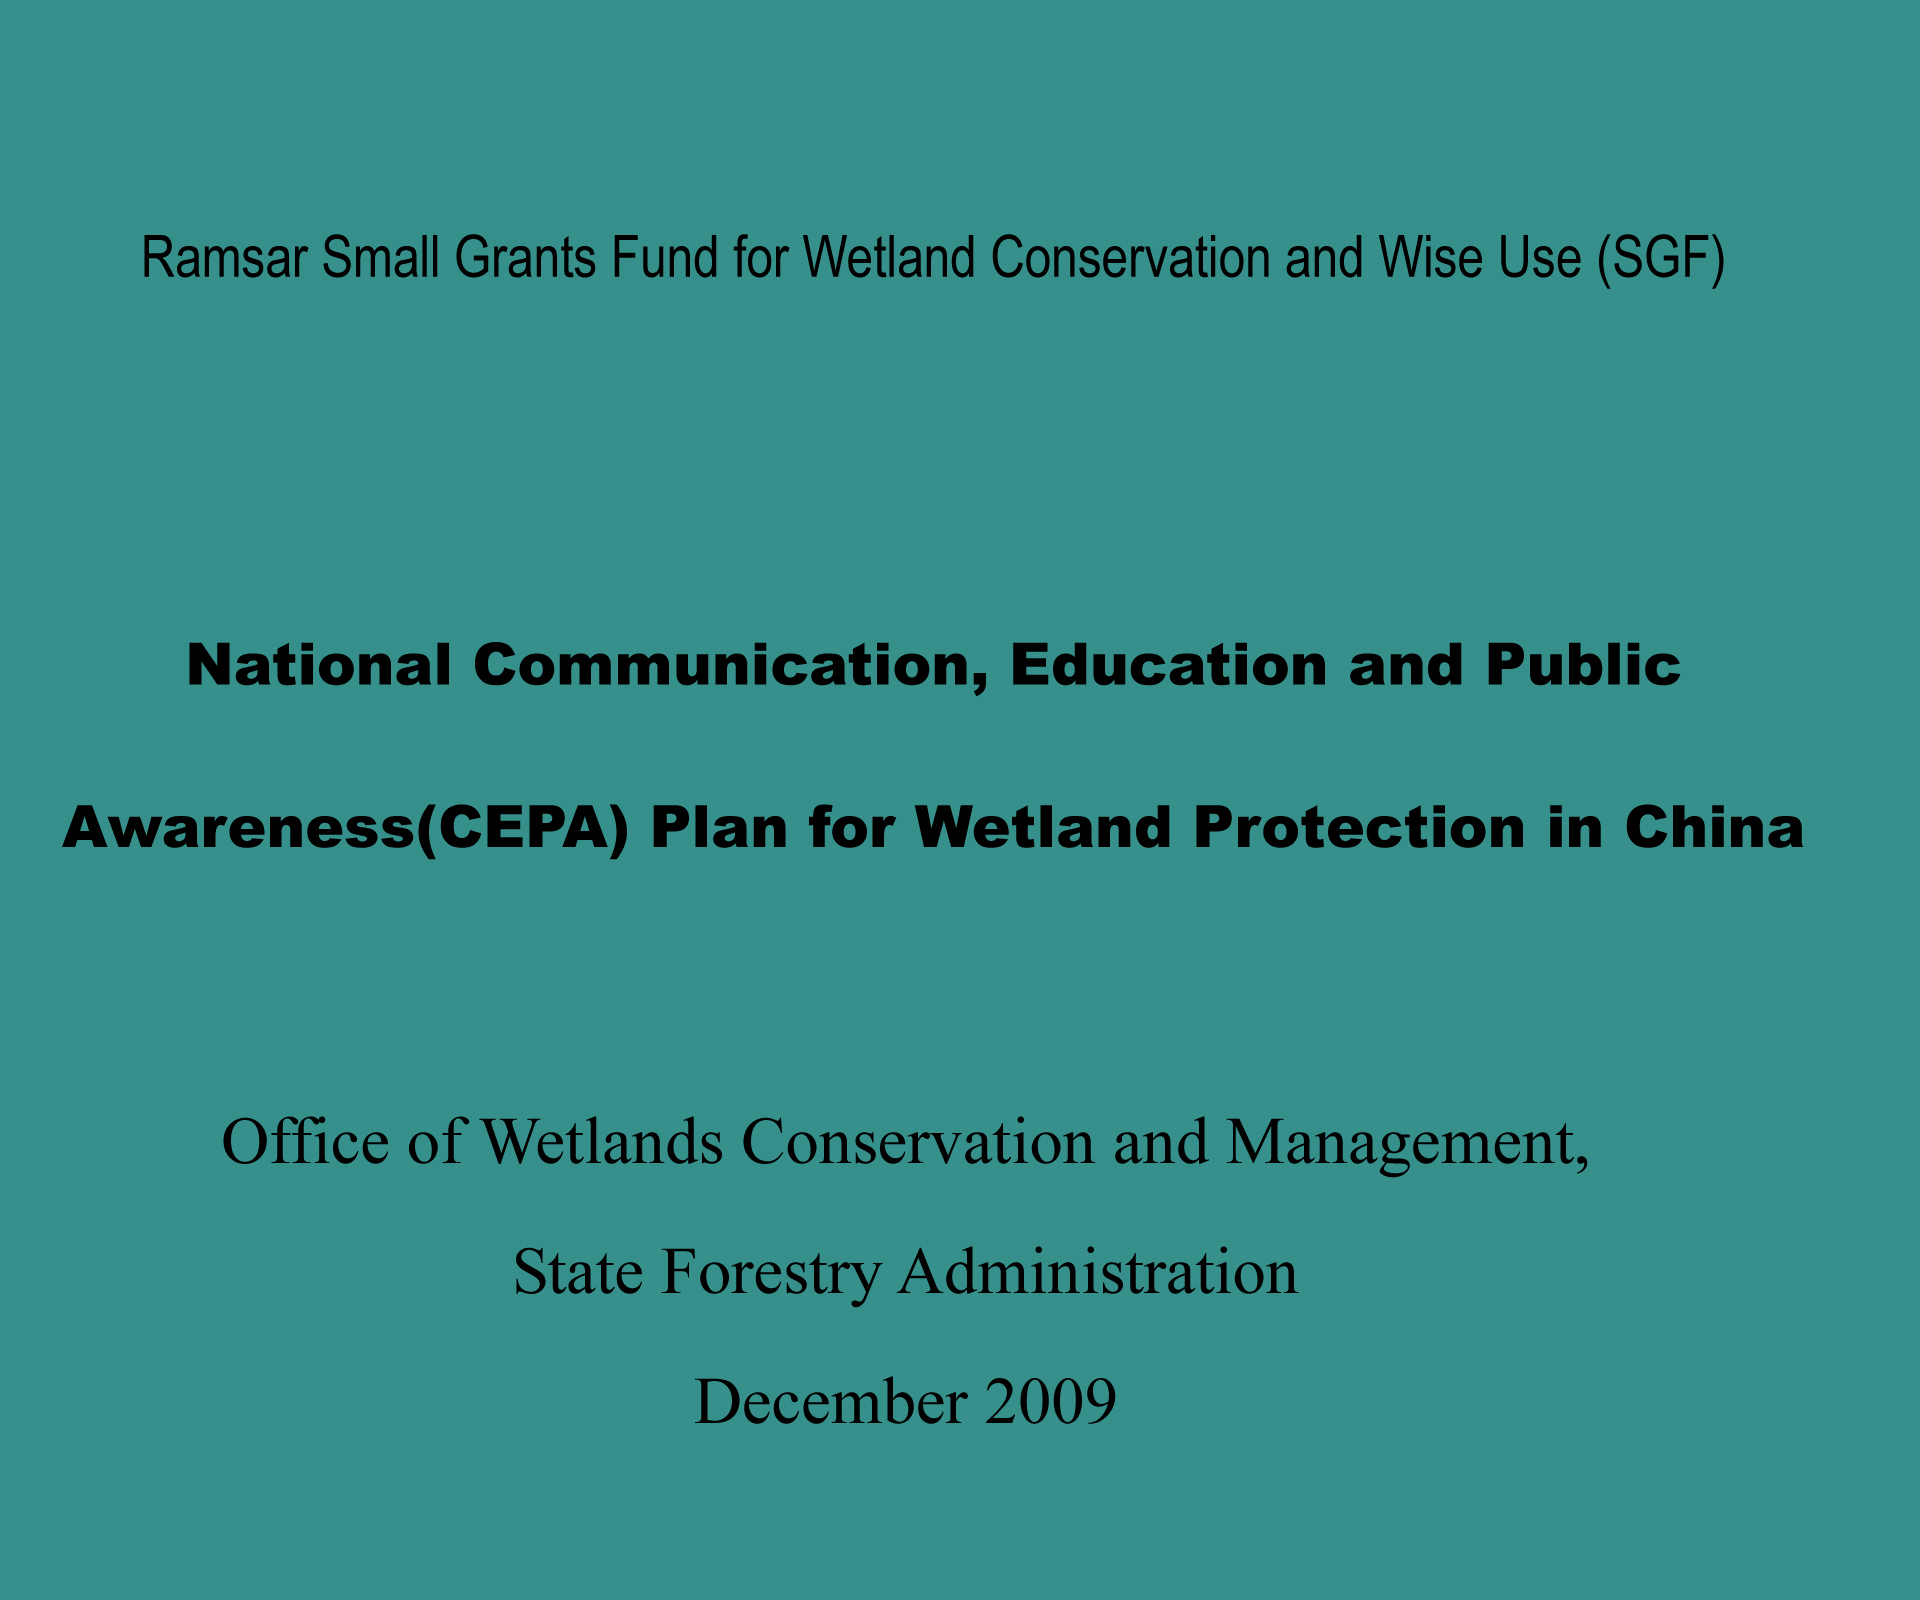 National Communication, Education and Public Awareness(CEPA) Plan for Wetland Protection in China